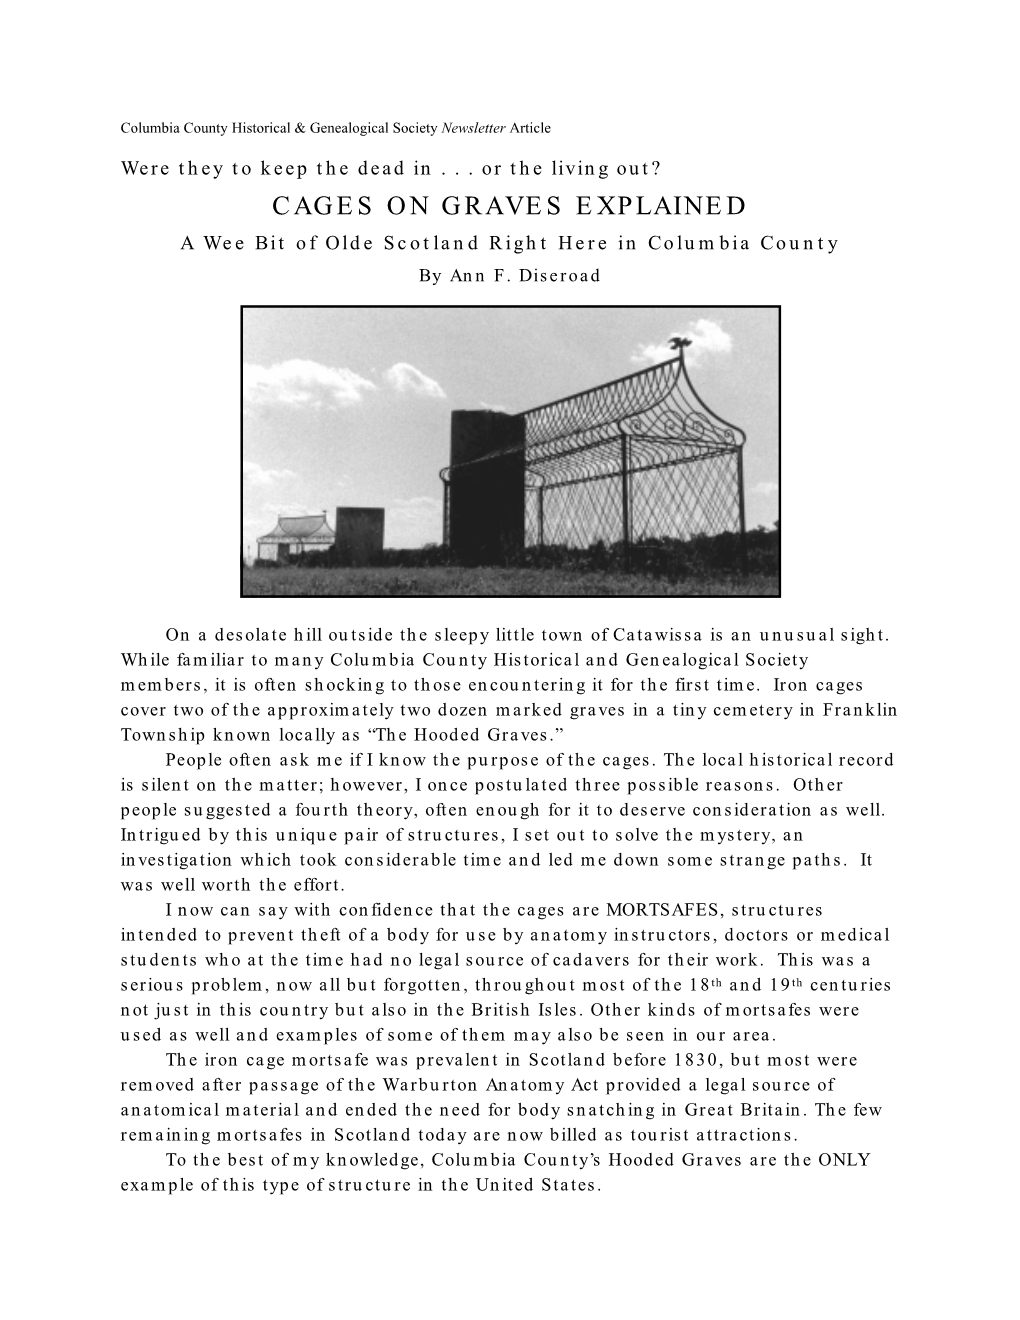 CAGES on GRAVES EXPLAINED a Wee Bit of Olde Scotland Right Here in Columbia County